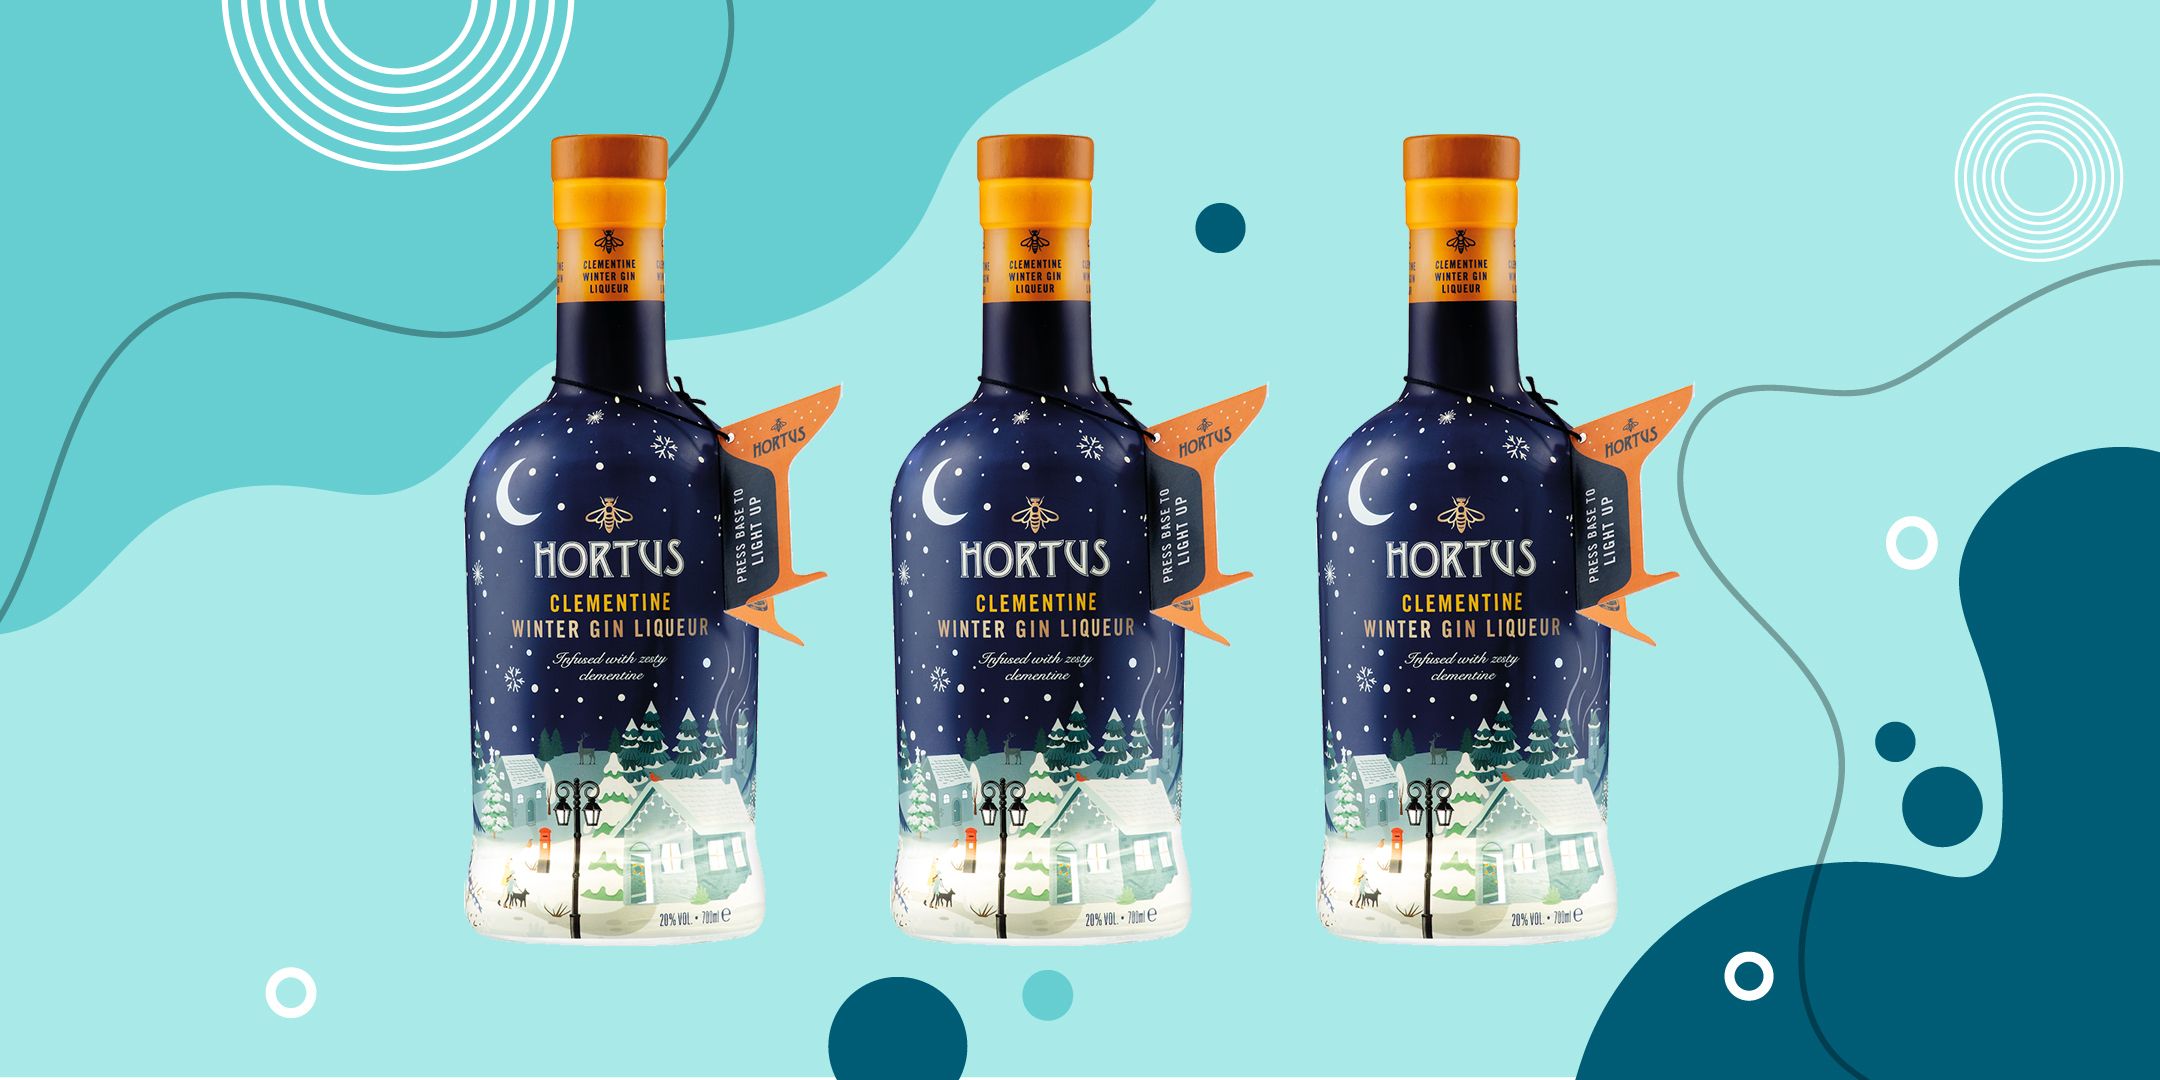 Lidl Launches For Light-Up A Gin Christmas